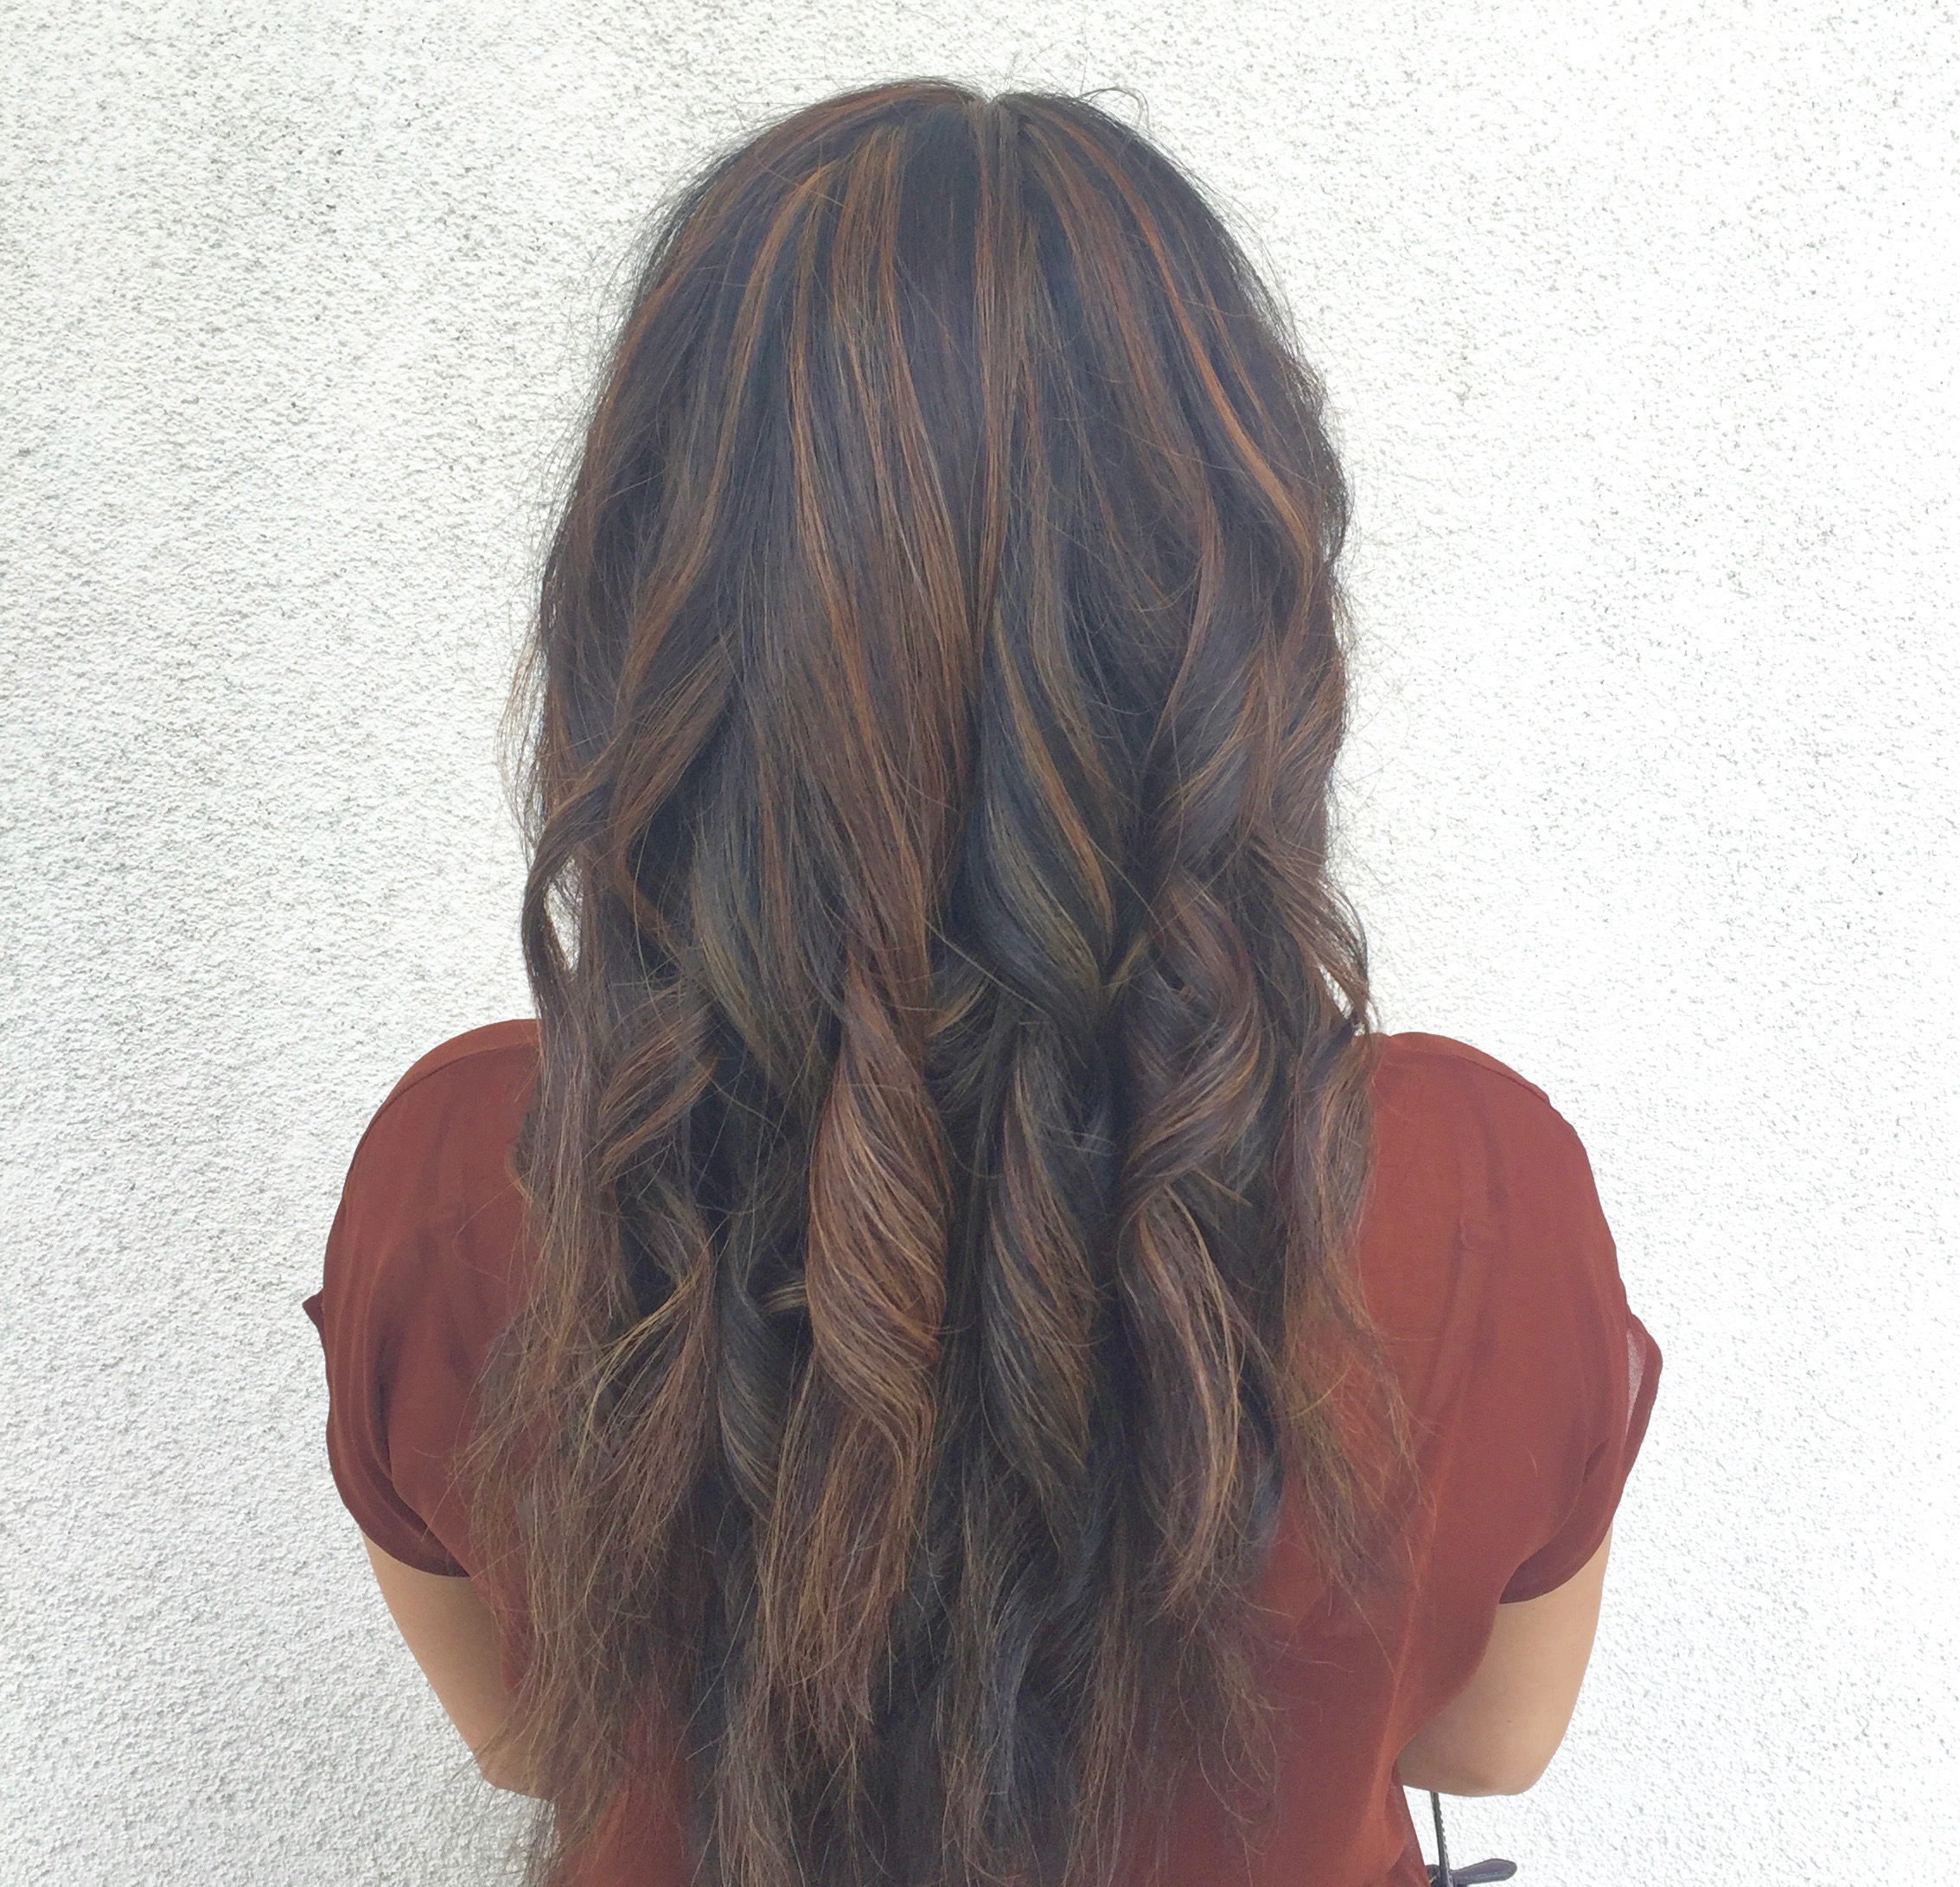 Copper Balayage Hair Painting